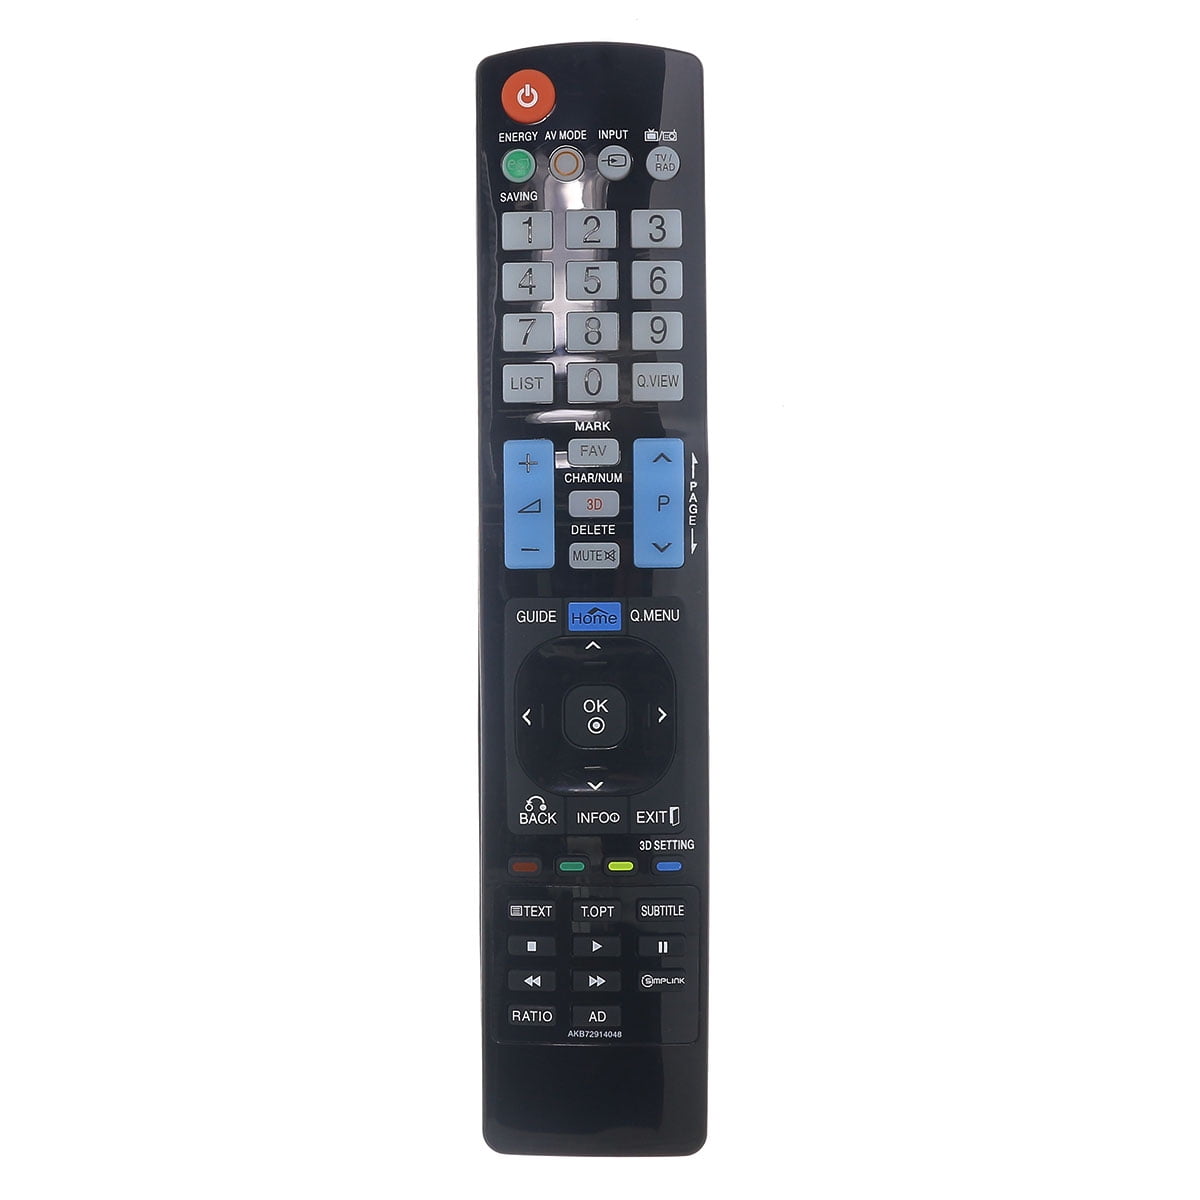 DEHA TV Remote Control for LG 37LH2000 Television